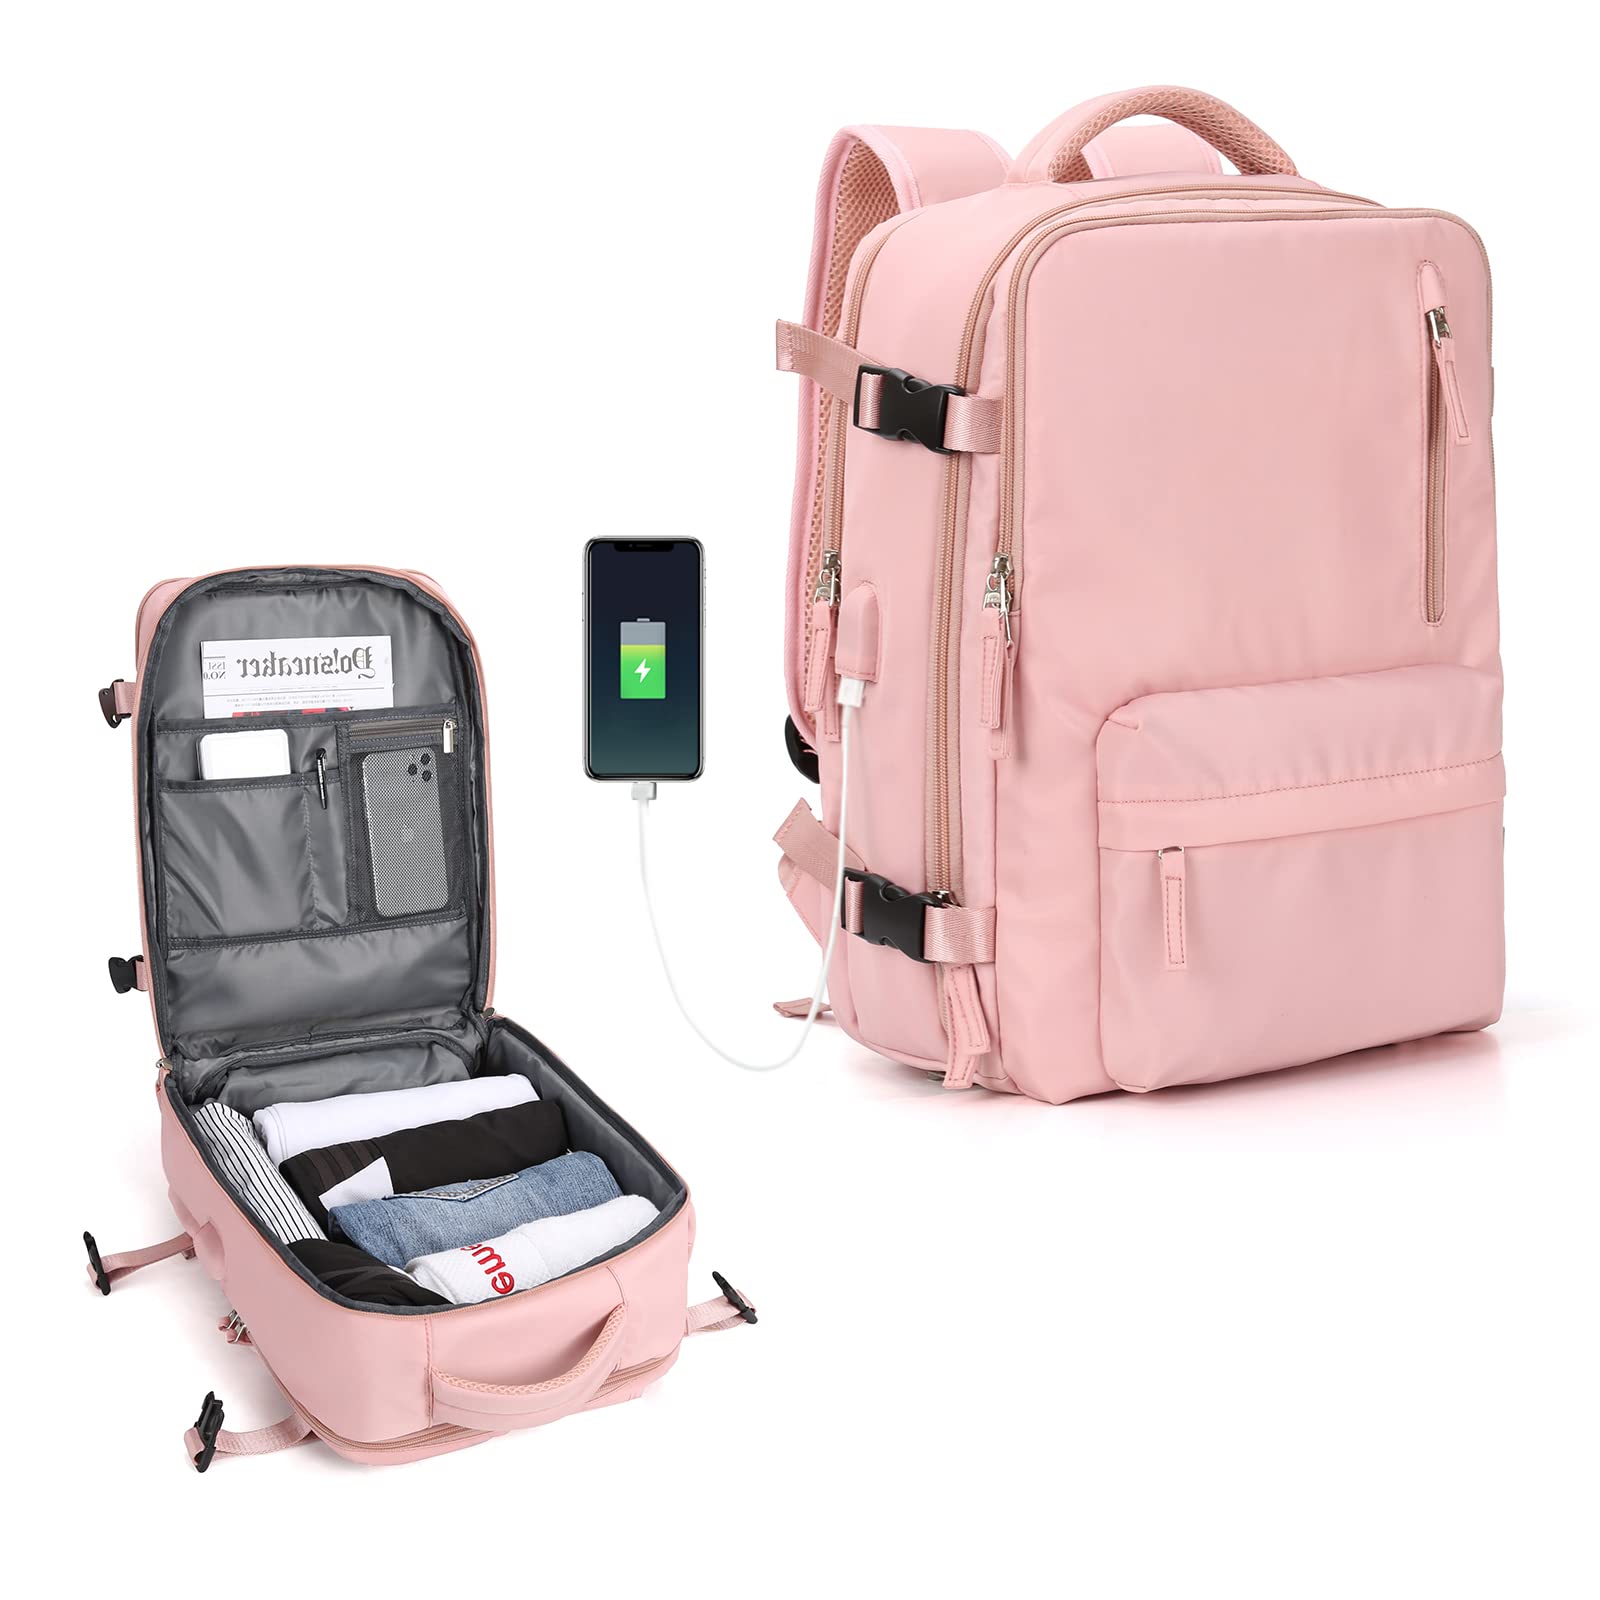 Large Travel Backpack Women, Carry On Backpack,Hiking Backpack Waterproof Outdoor Sports Rucksack Casual Daypack with Shoes Compartment, Pink